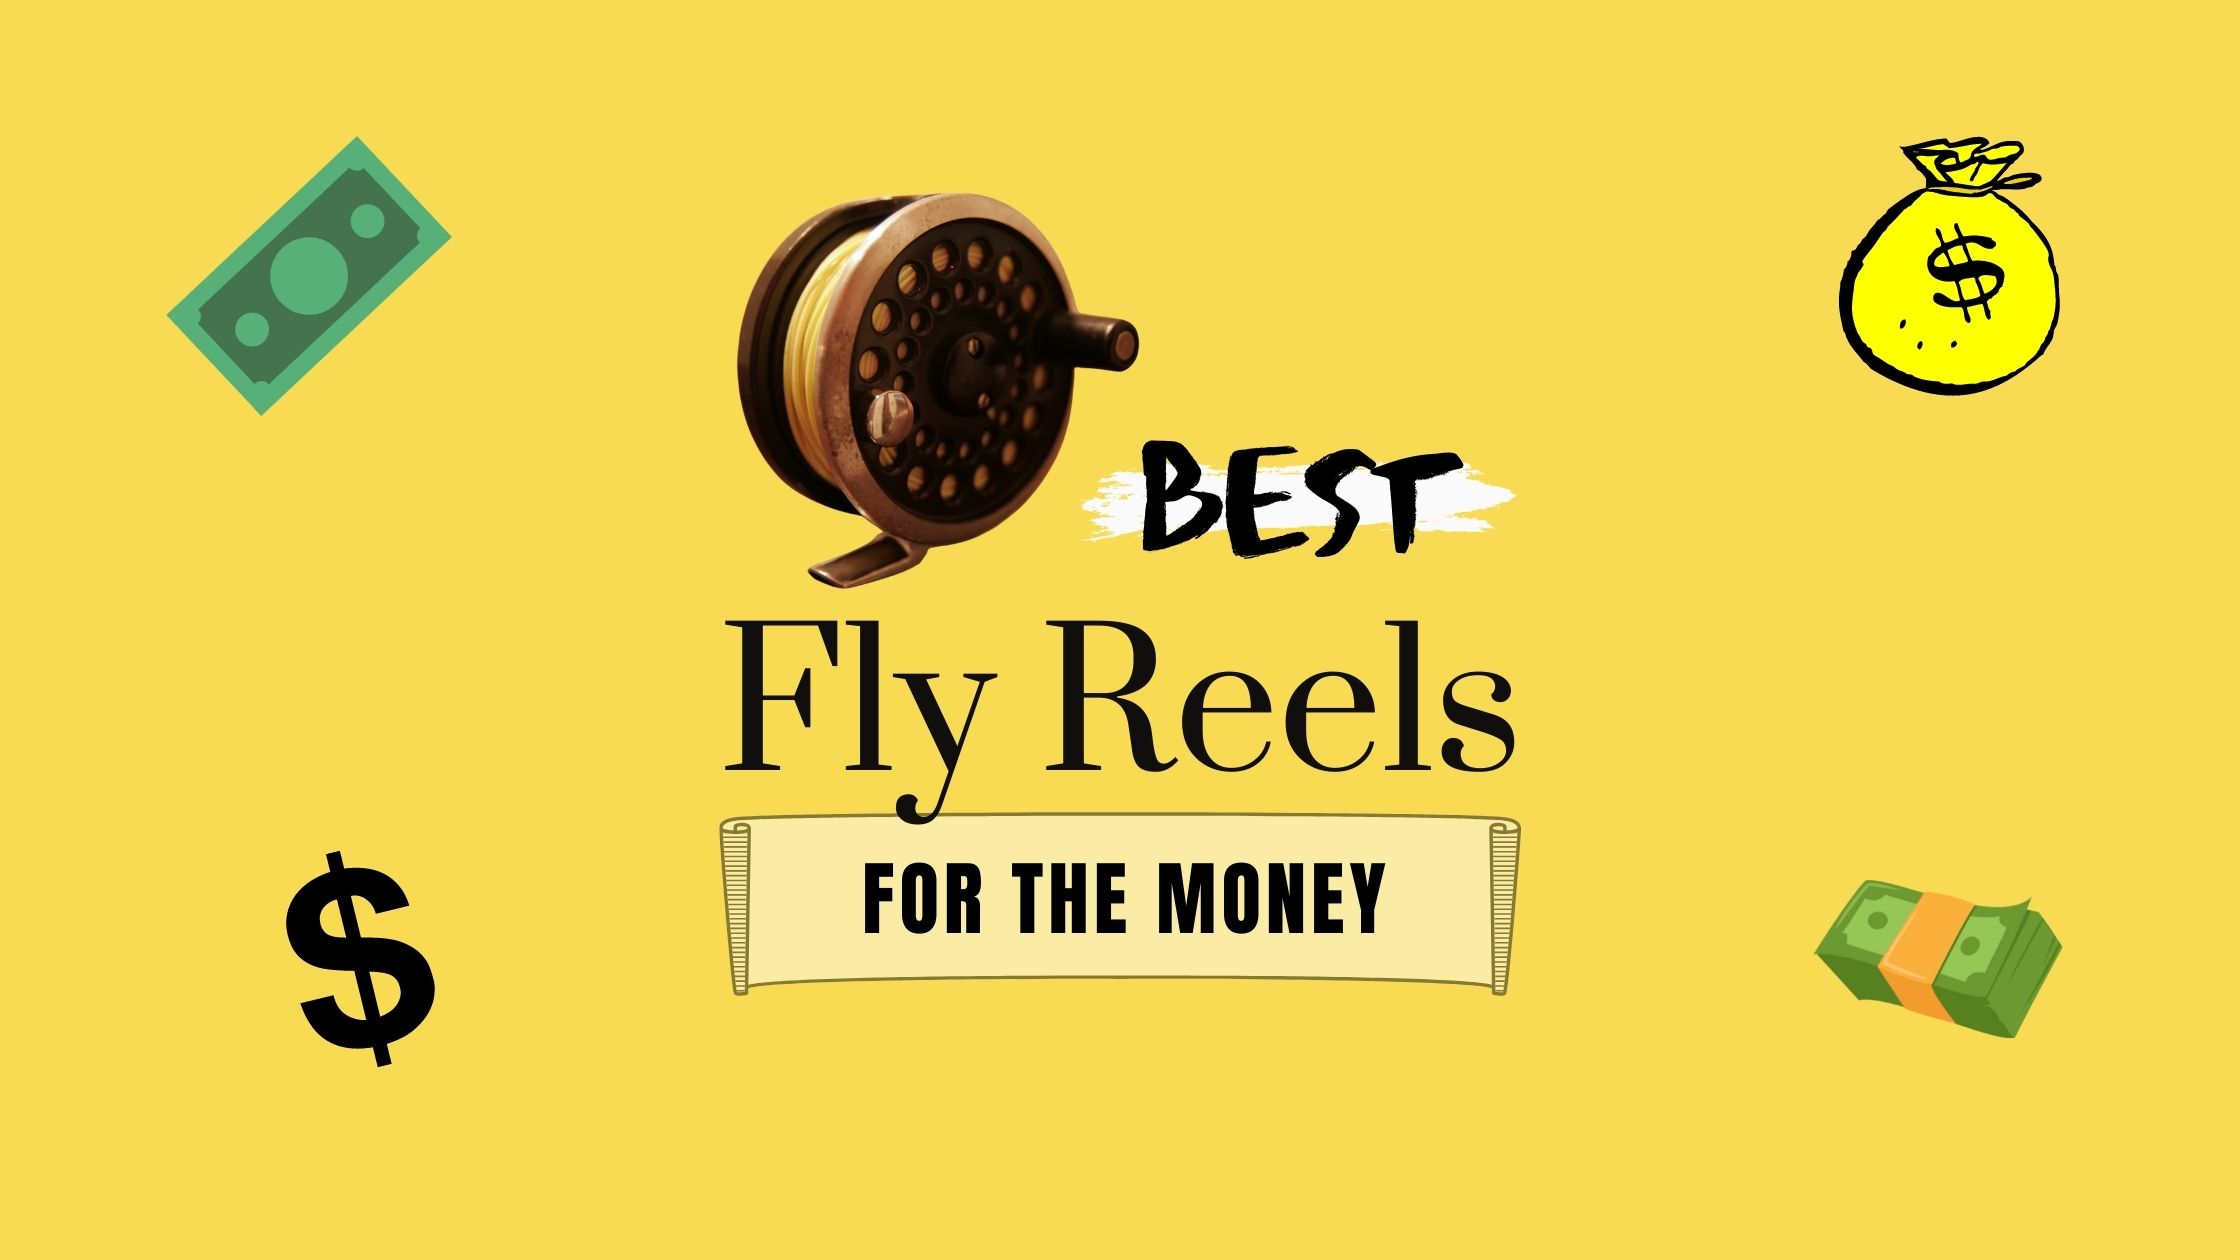 Best fly reel for money - featured image